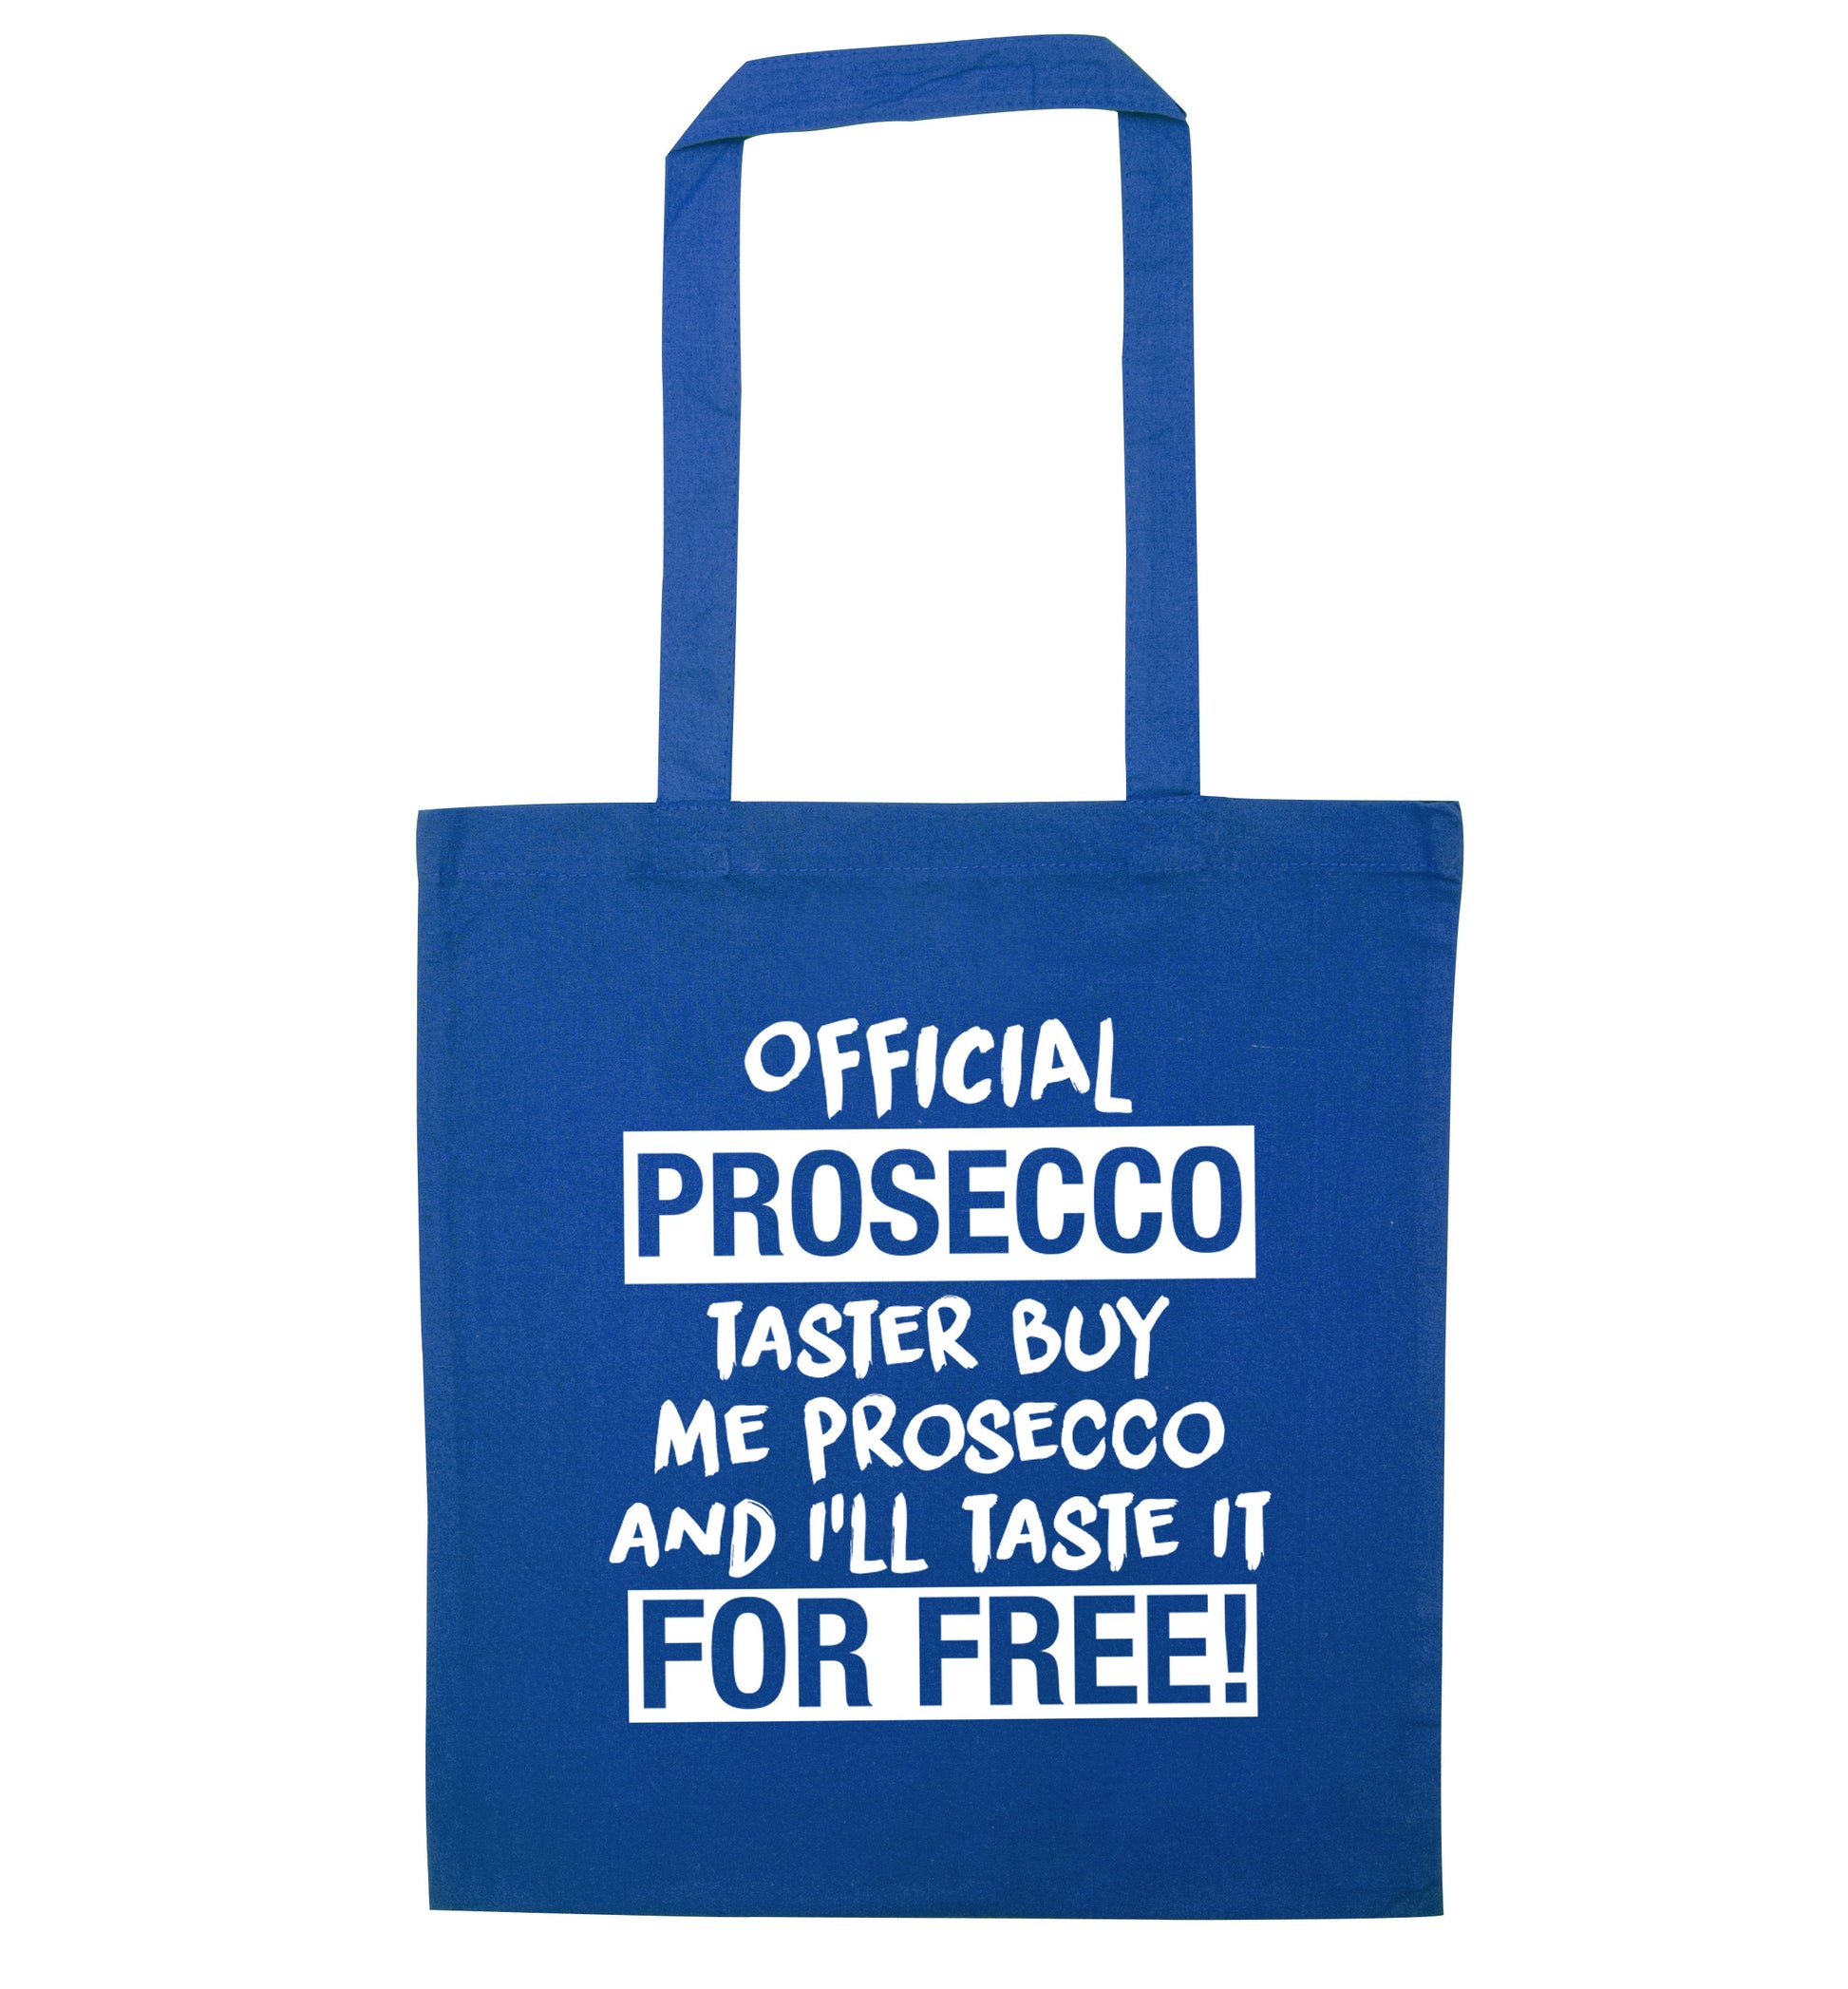 Official prosecco taster buy me wine and I'll taste it for free blue tote bag